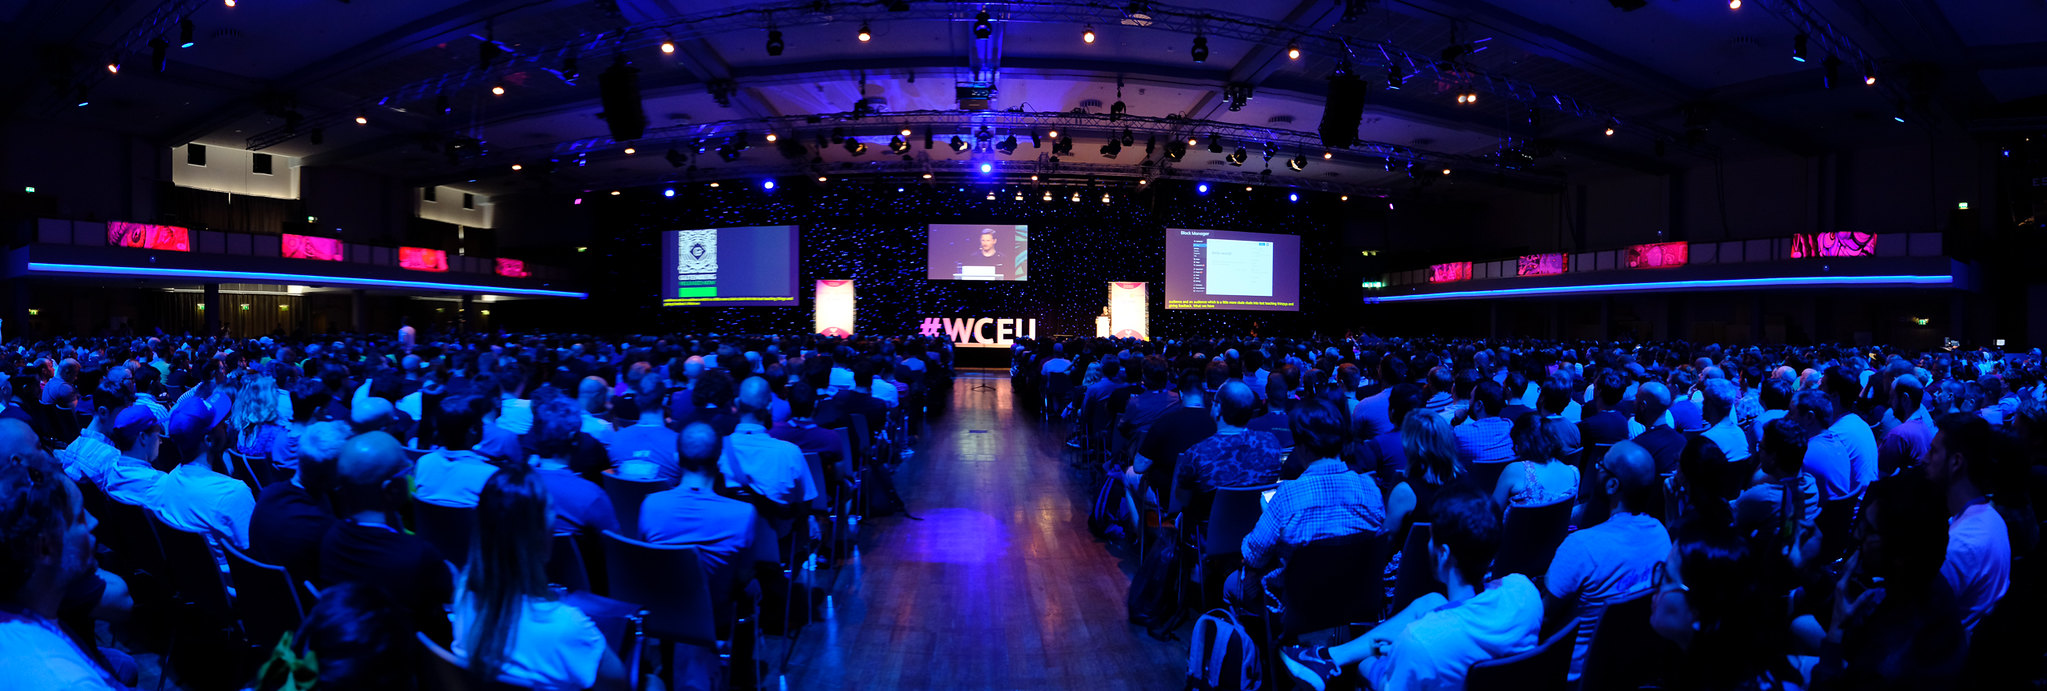 View of WCEU 2019 stage and audience from the back of the hall